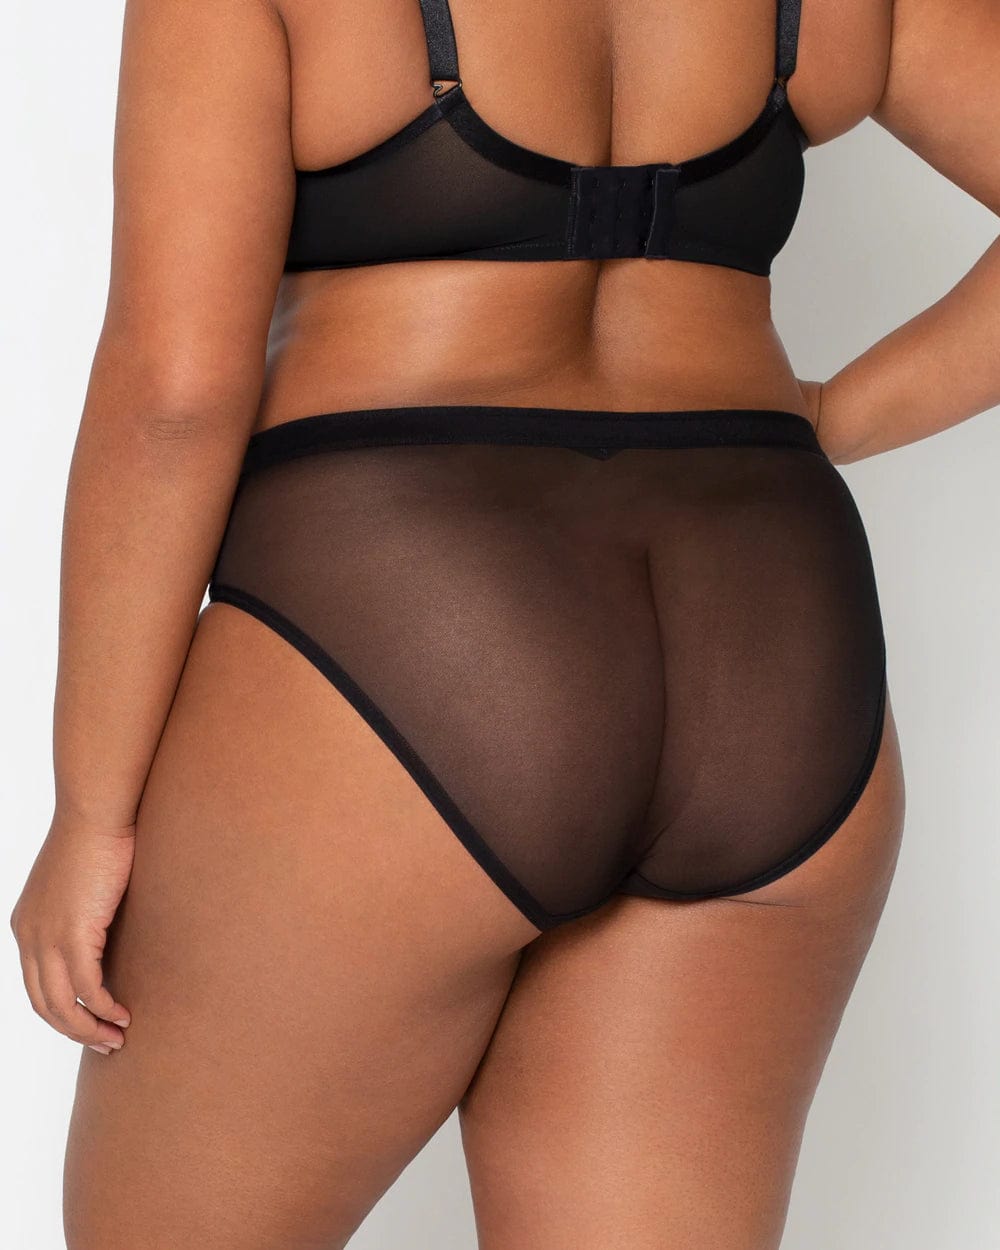 Sheer Mesh High-cut Panty Underwear Black Classic French Cut See Through  Panties See Through Lingerie -  Canada